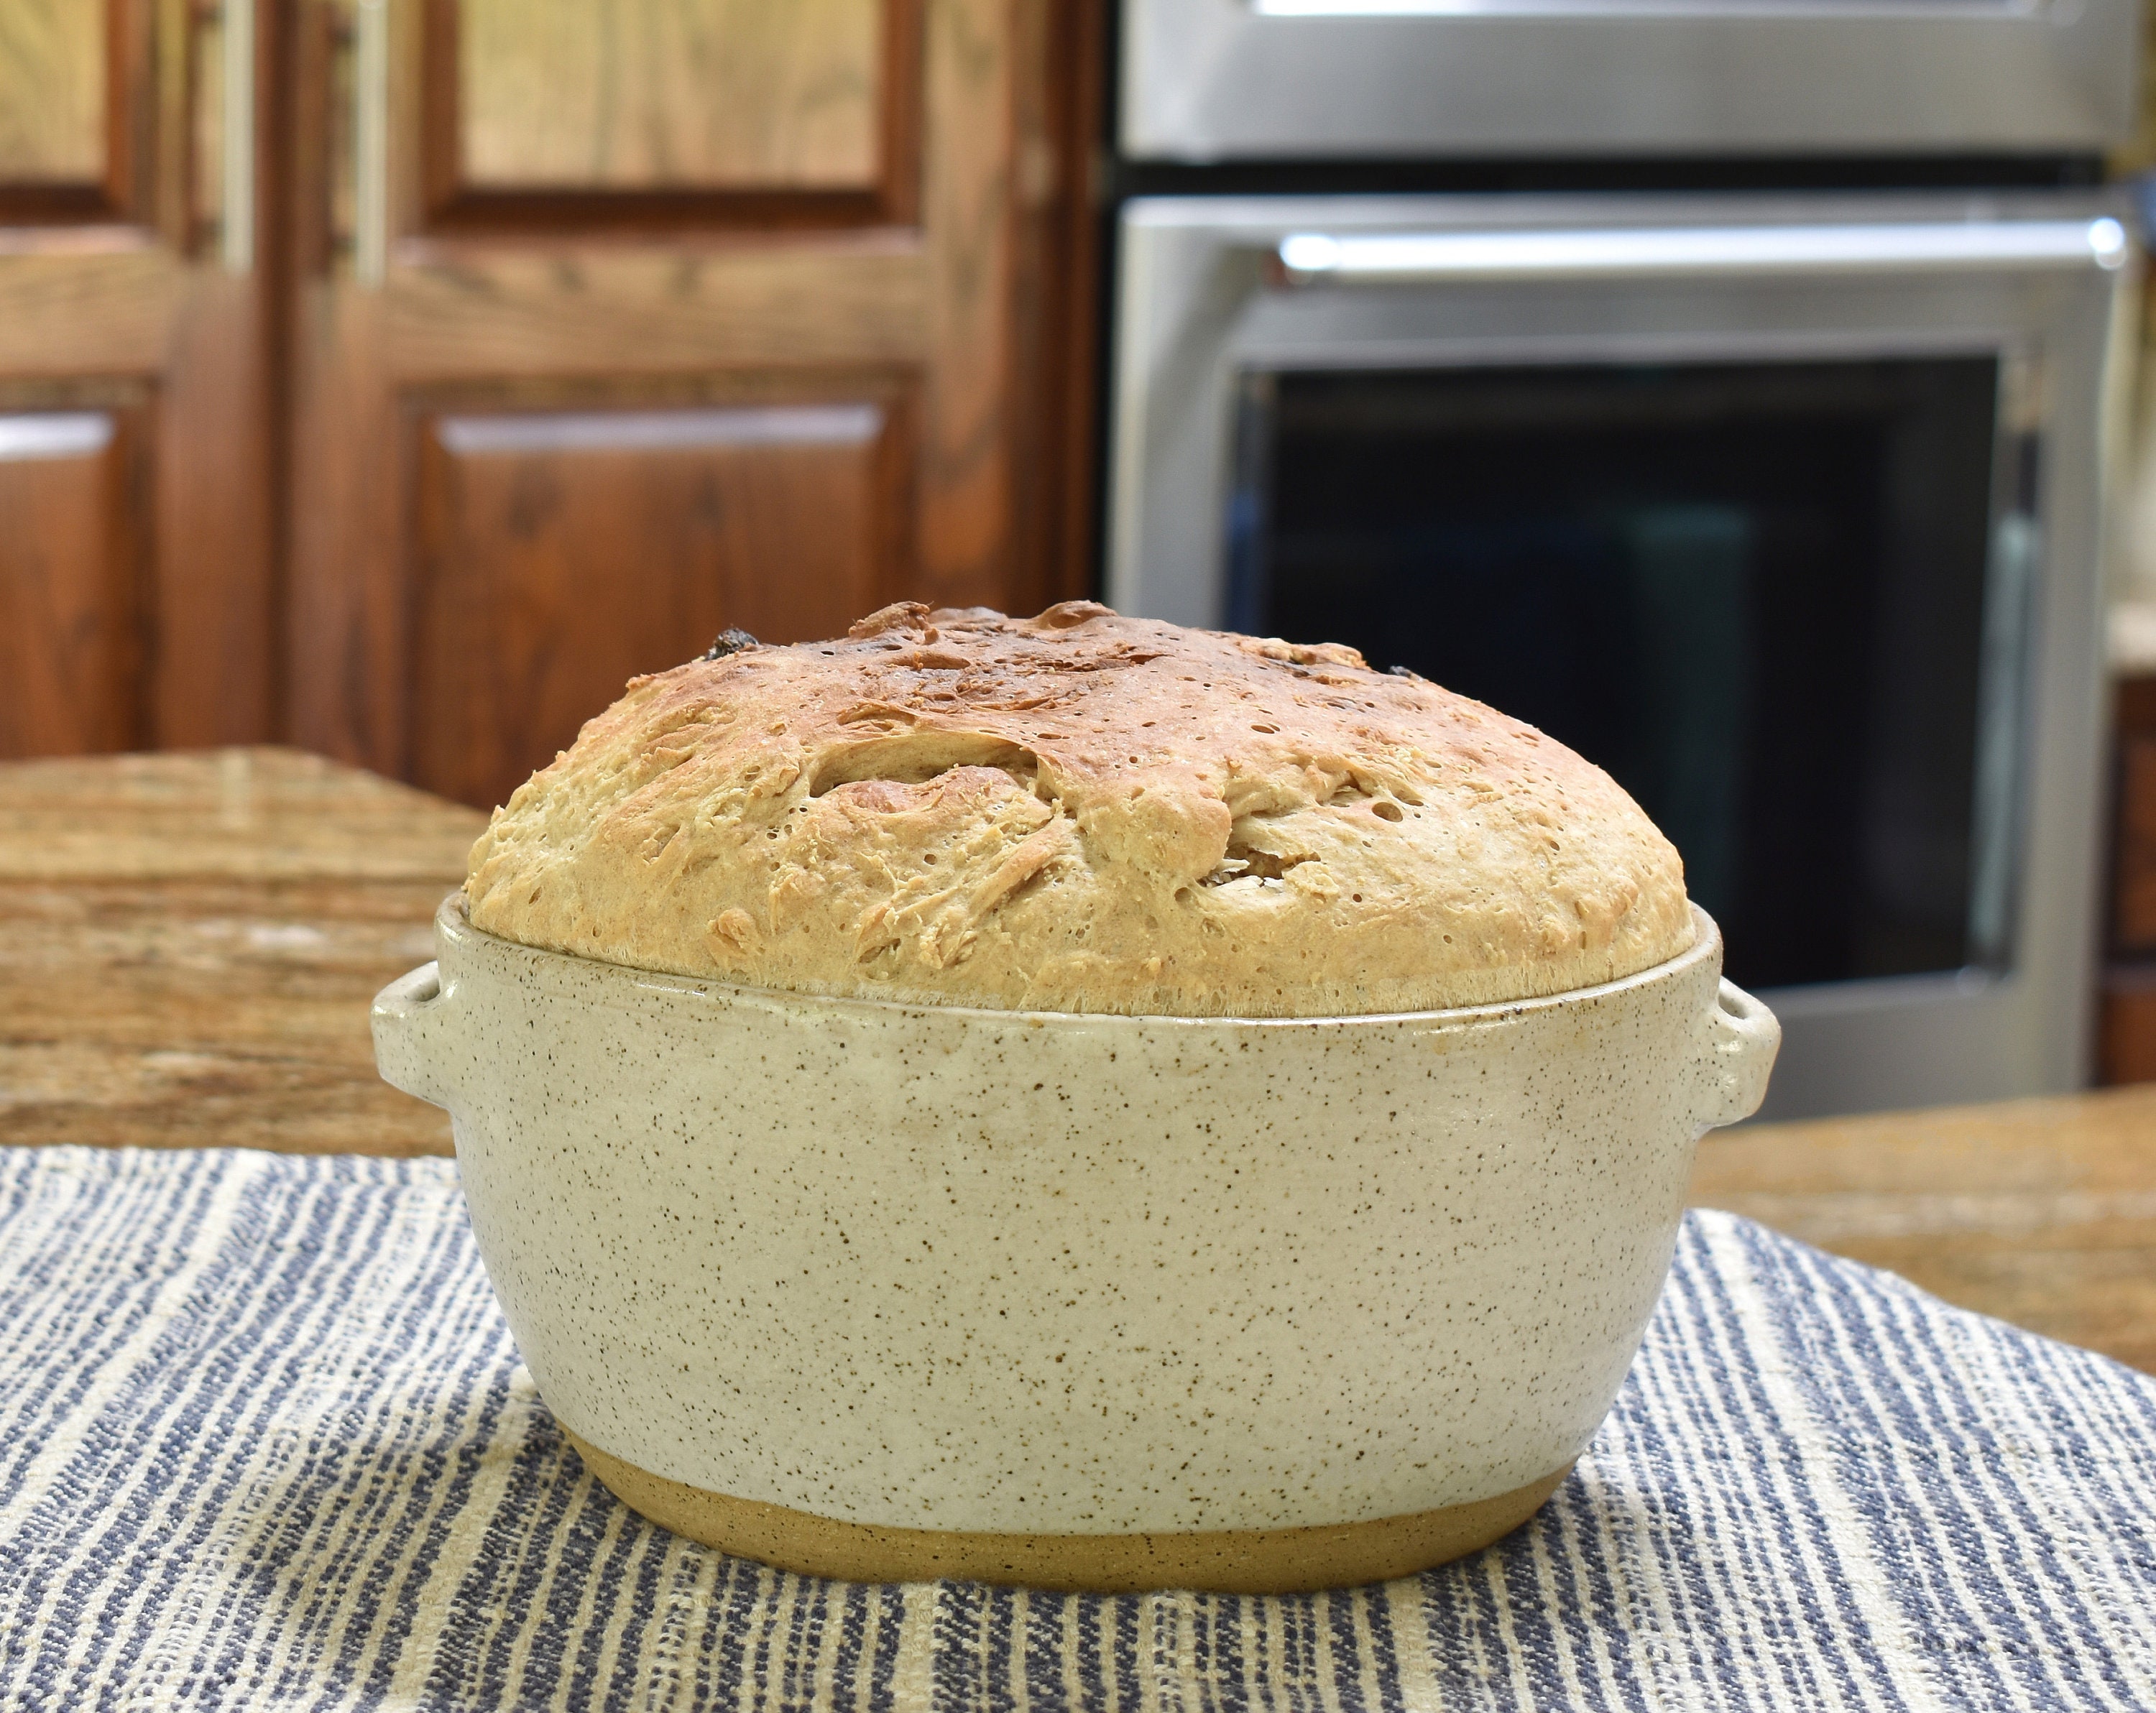  Potted Pans Dutch Oven for Sourdough Bread Baking - 10 Inch Red  Enameled Cast Iron Bread Cloche for Homemade Bread Boule Loaves - Artisan  Bakers Ceramic Coated Loaf Pan for No